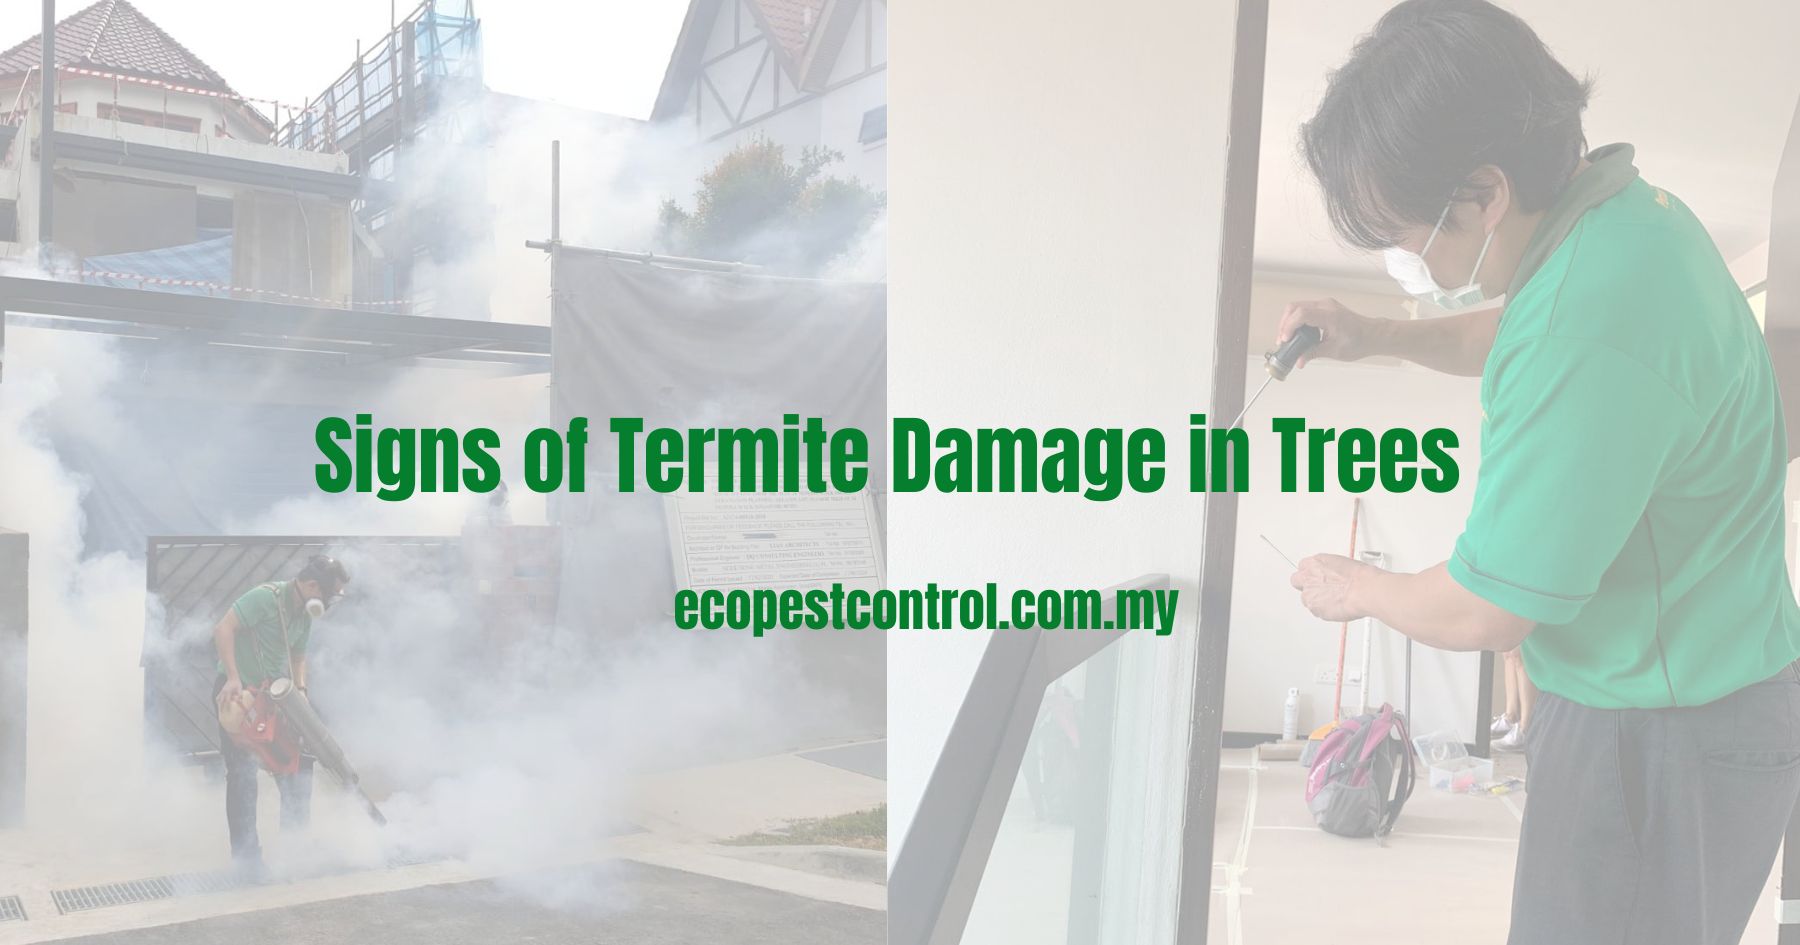 Signs of Termite Damage in Trees